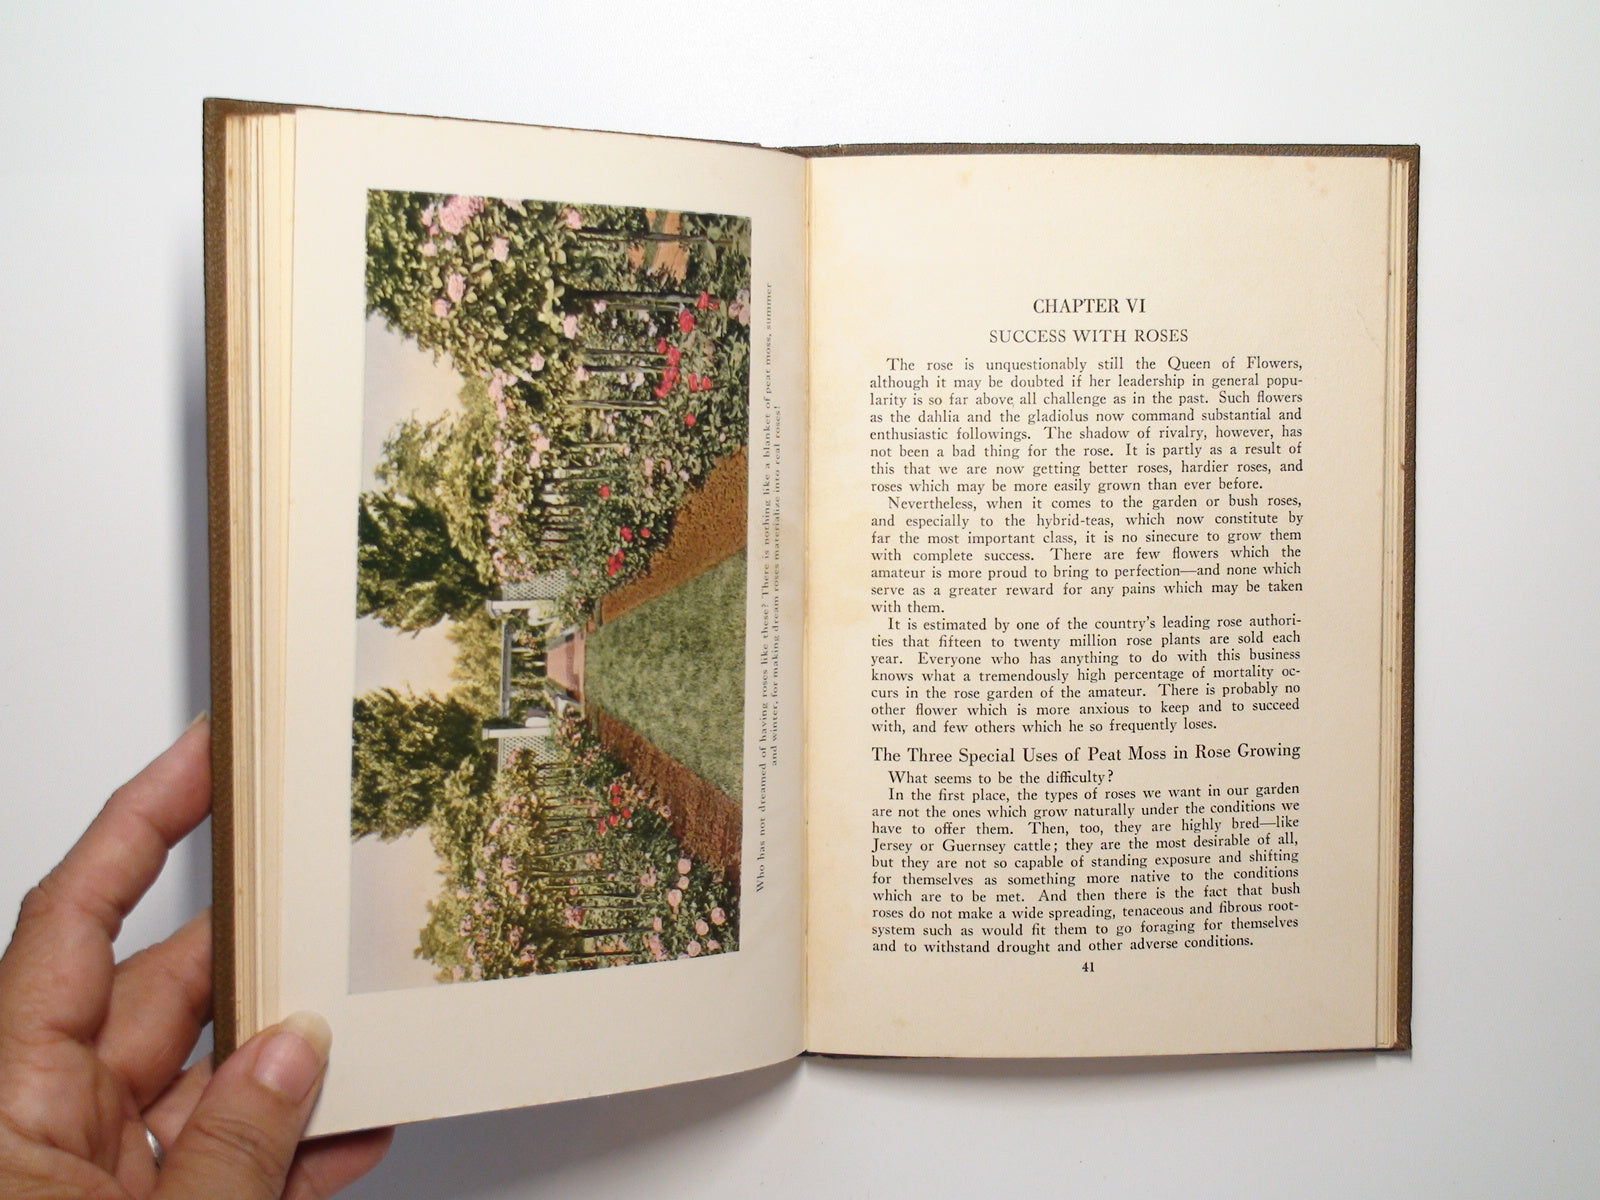 Gardening with Peat Moss, by F. F. Rockwell, Illustrated, 1st Ed, 1928